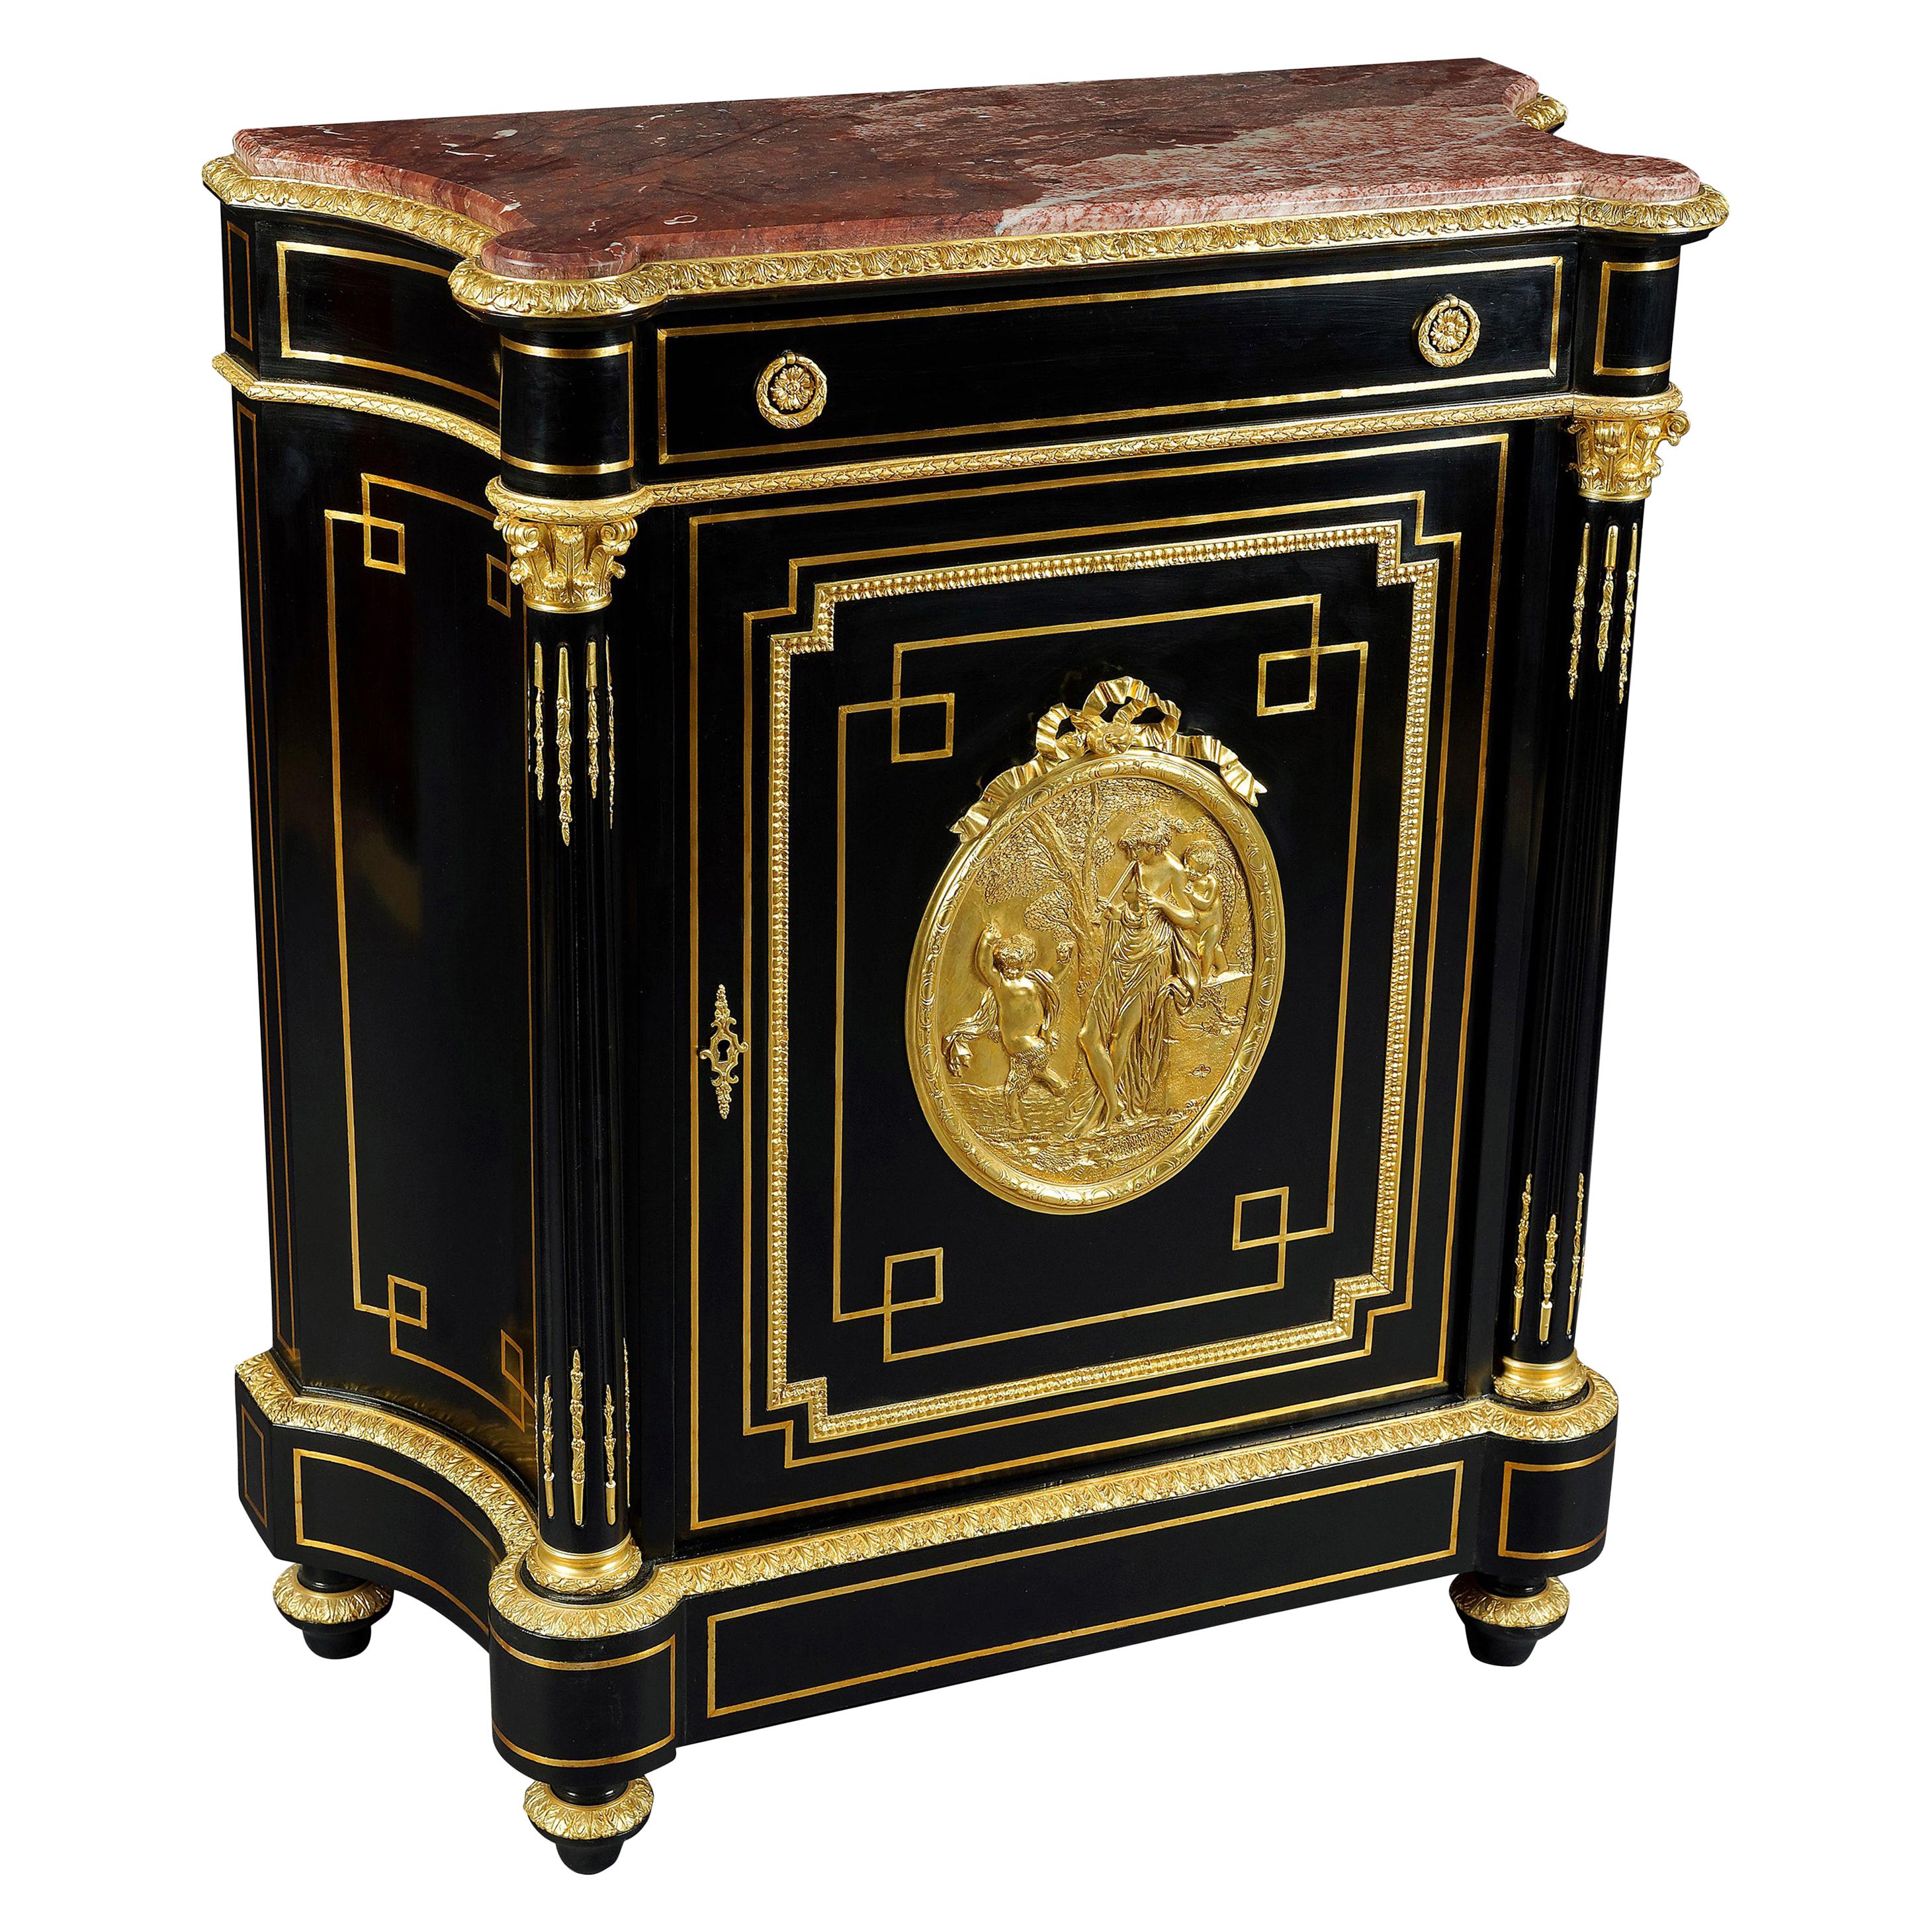 20th Century Louis XV Style Meuble d'appui Cabinet For Sale